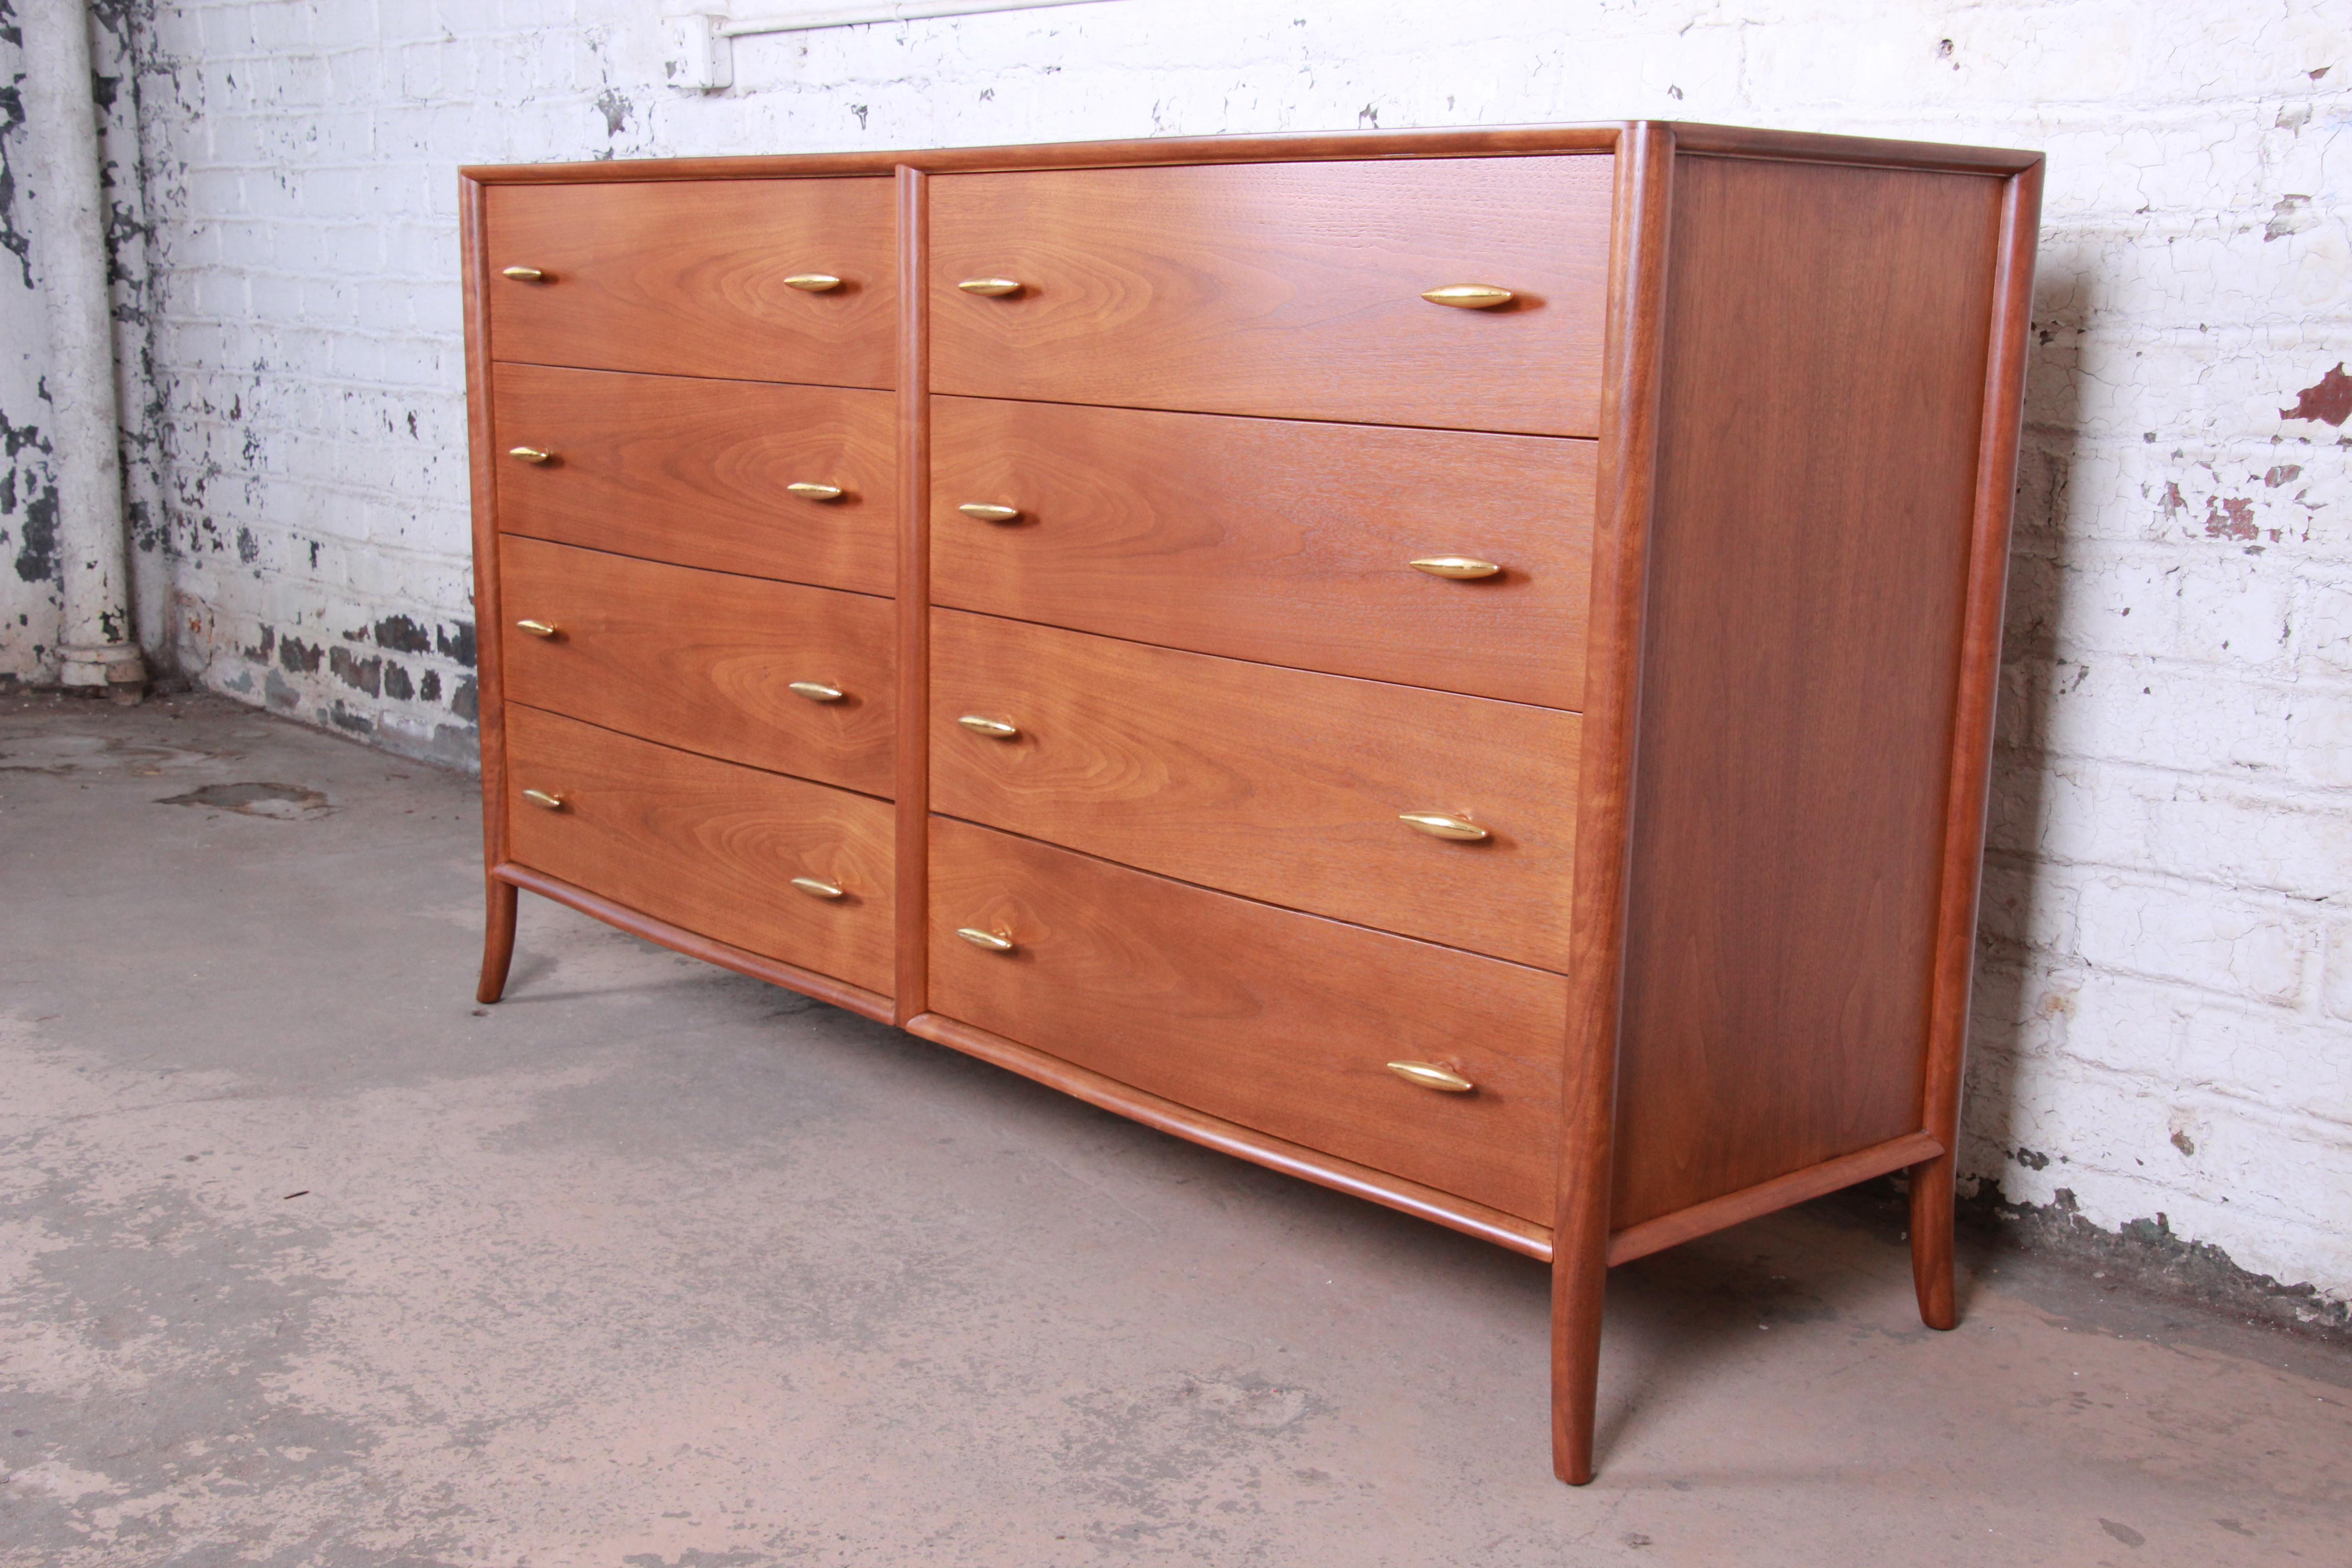 An extremely rare and exceptional Mid-Century Modern sculpted walnut saber leg double dresser designed by T.H. Robsjohn-Gibbings for Widdicomb Furniture of Grand Rapids, circa 1955. The dresser features stunning walnut wood grain with sculpted solid